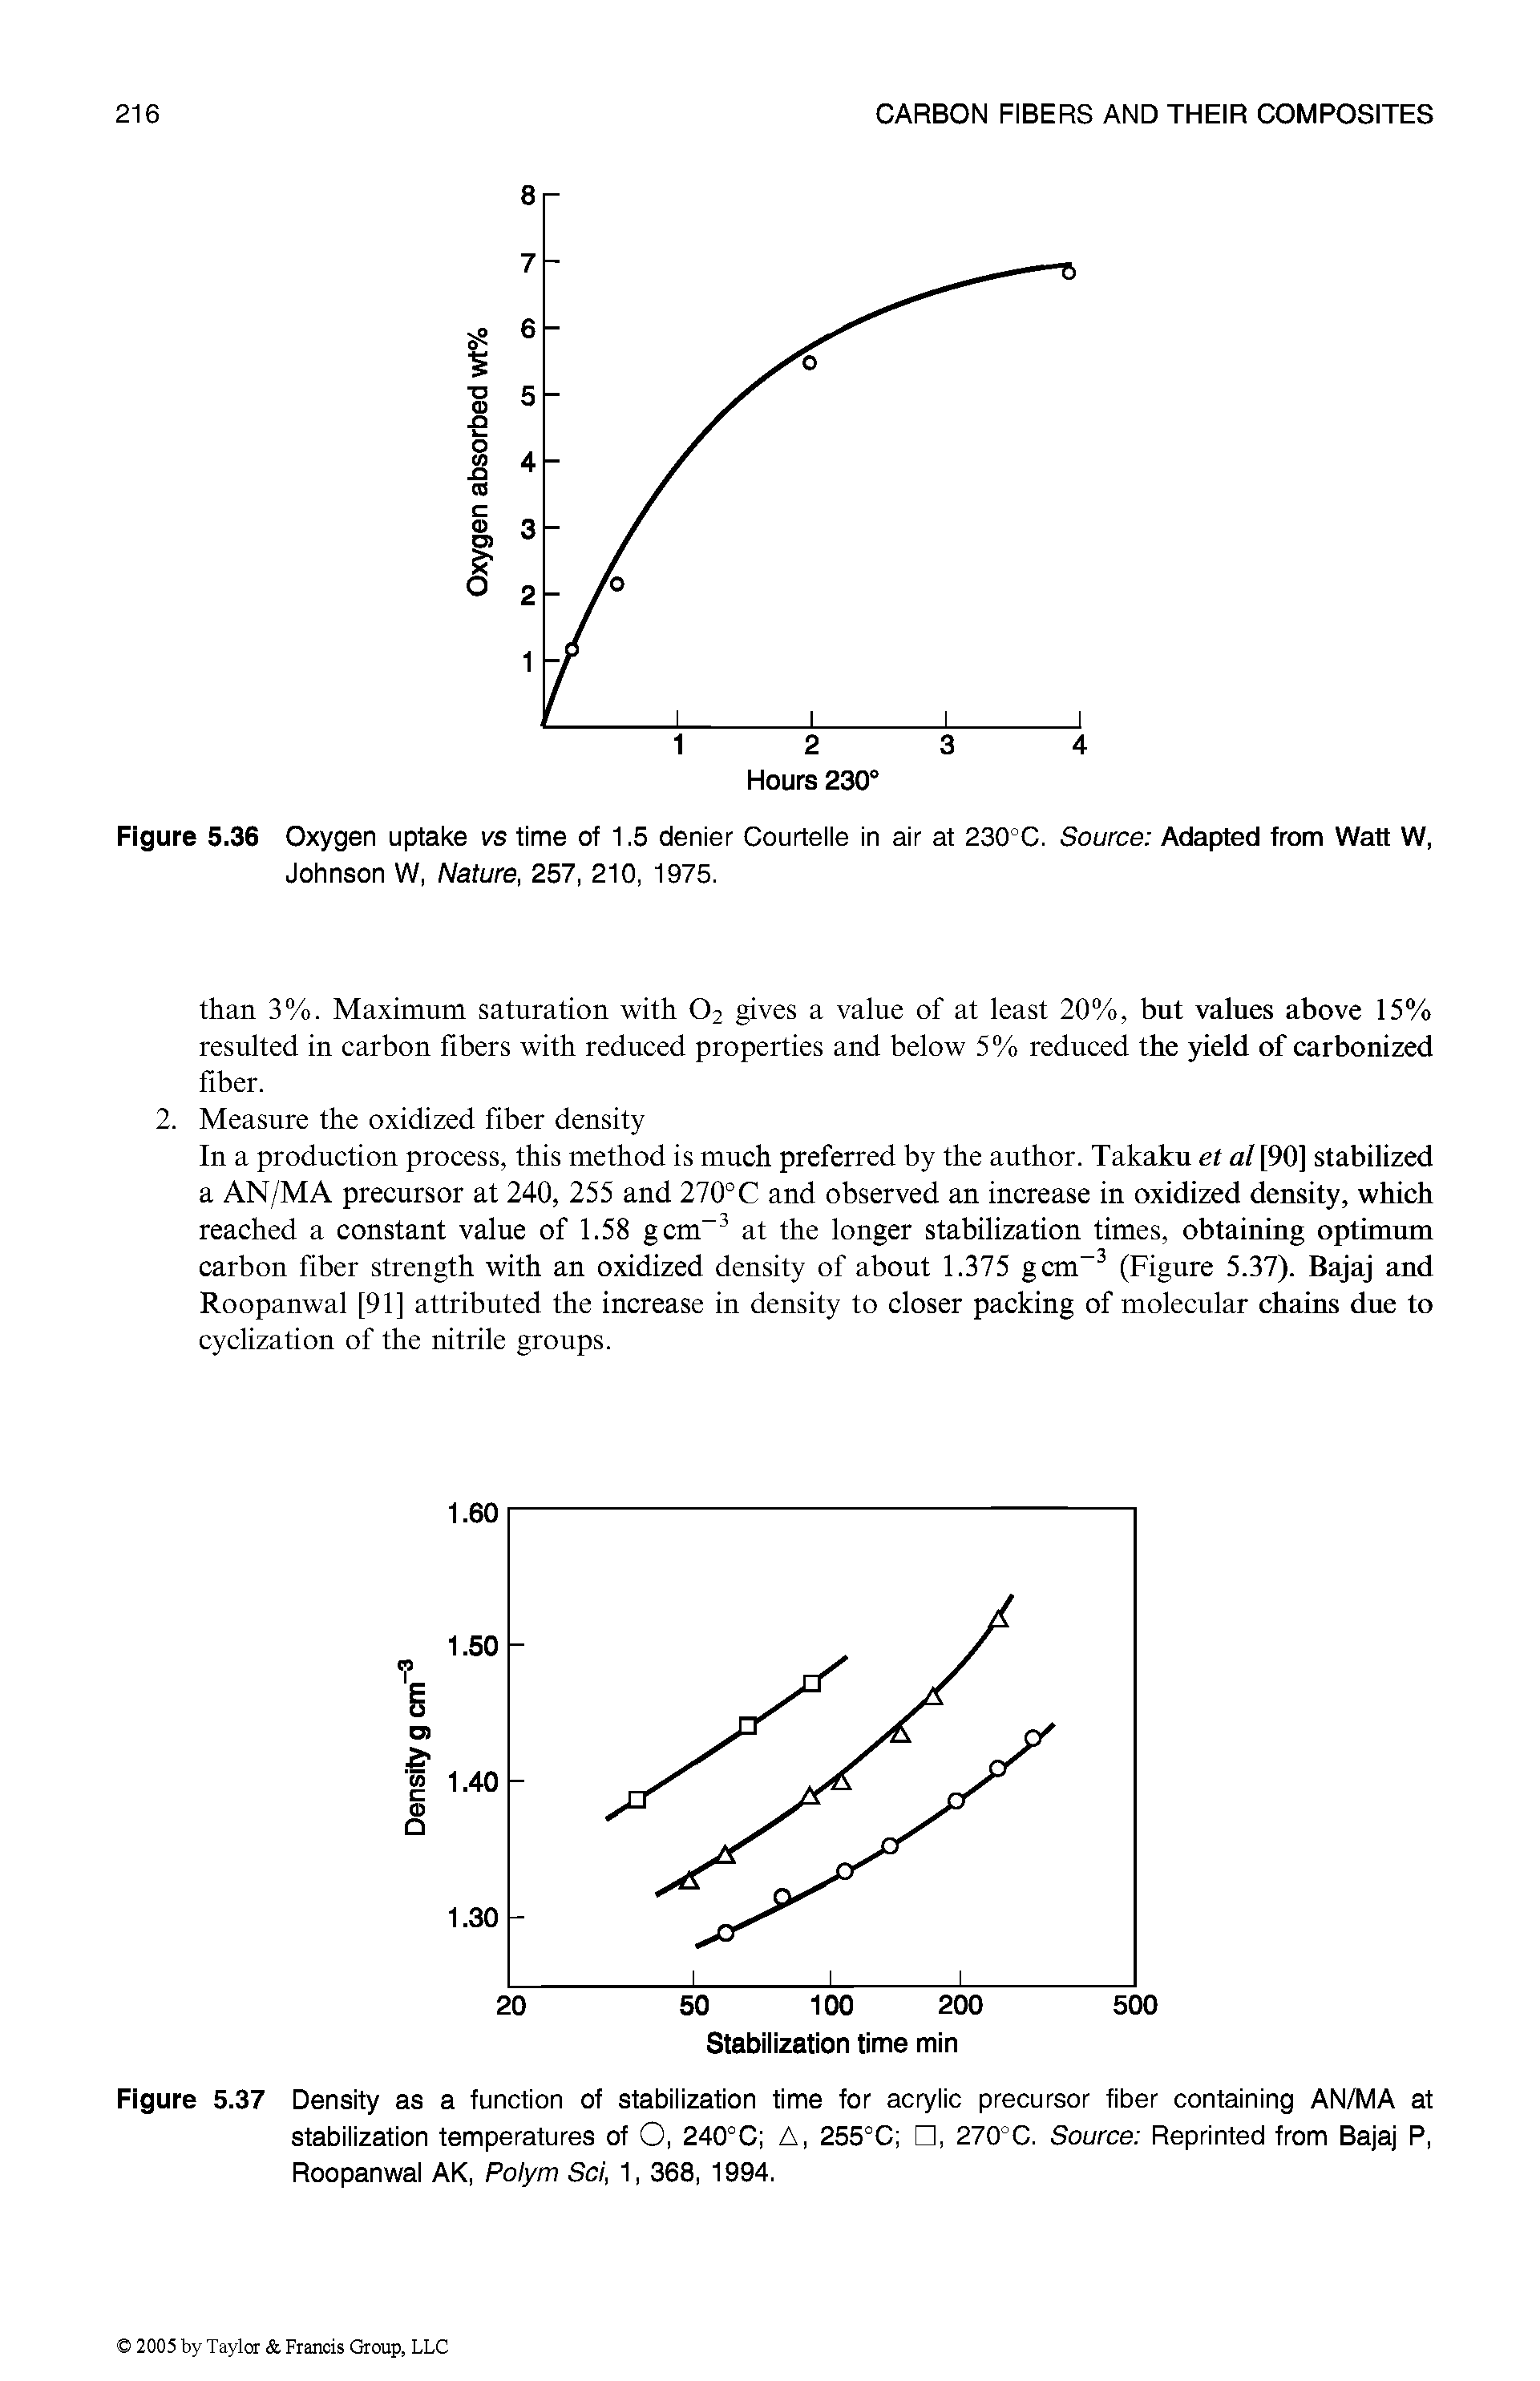 Figure 5.37 Density as a function of stabilization time for acrylic precursor fiber containing AN/MA at stabilization temperatures of O, 240°C A, 255°C , 270°C. Source Reprinted from Bajaj P, Roopanwal AK, Polym Sci, 1,368, 1994.